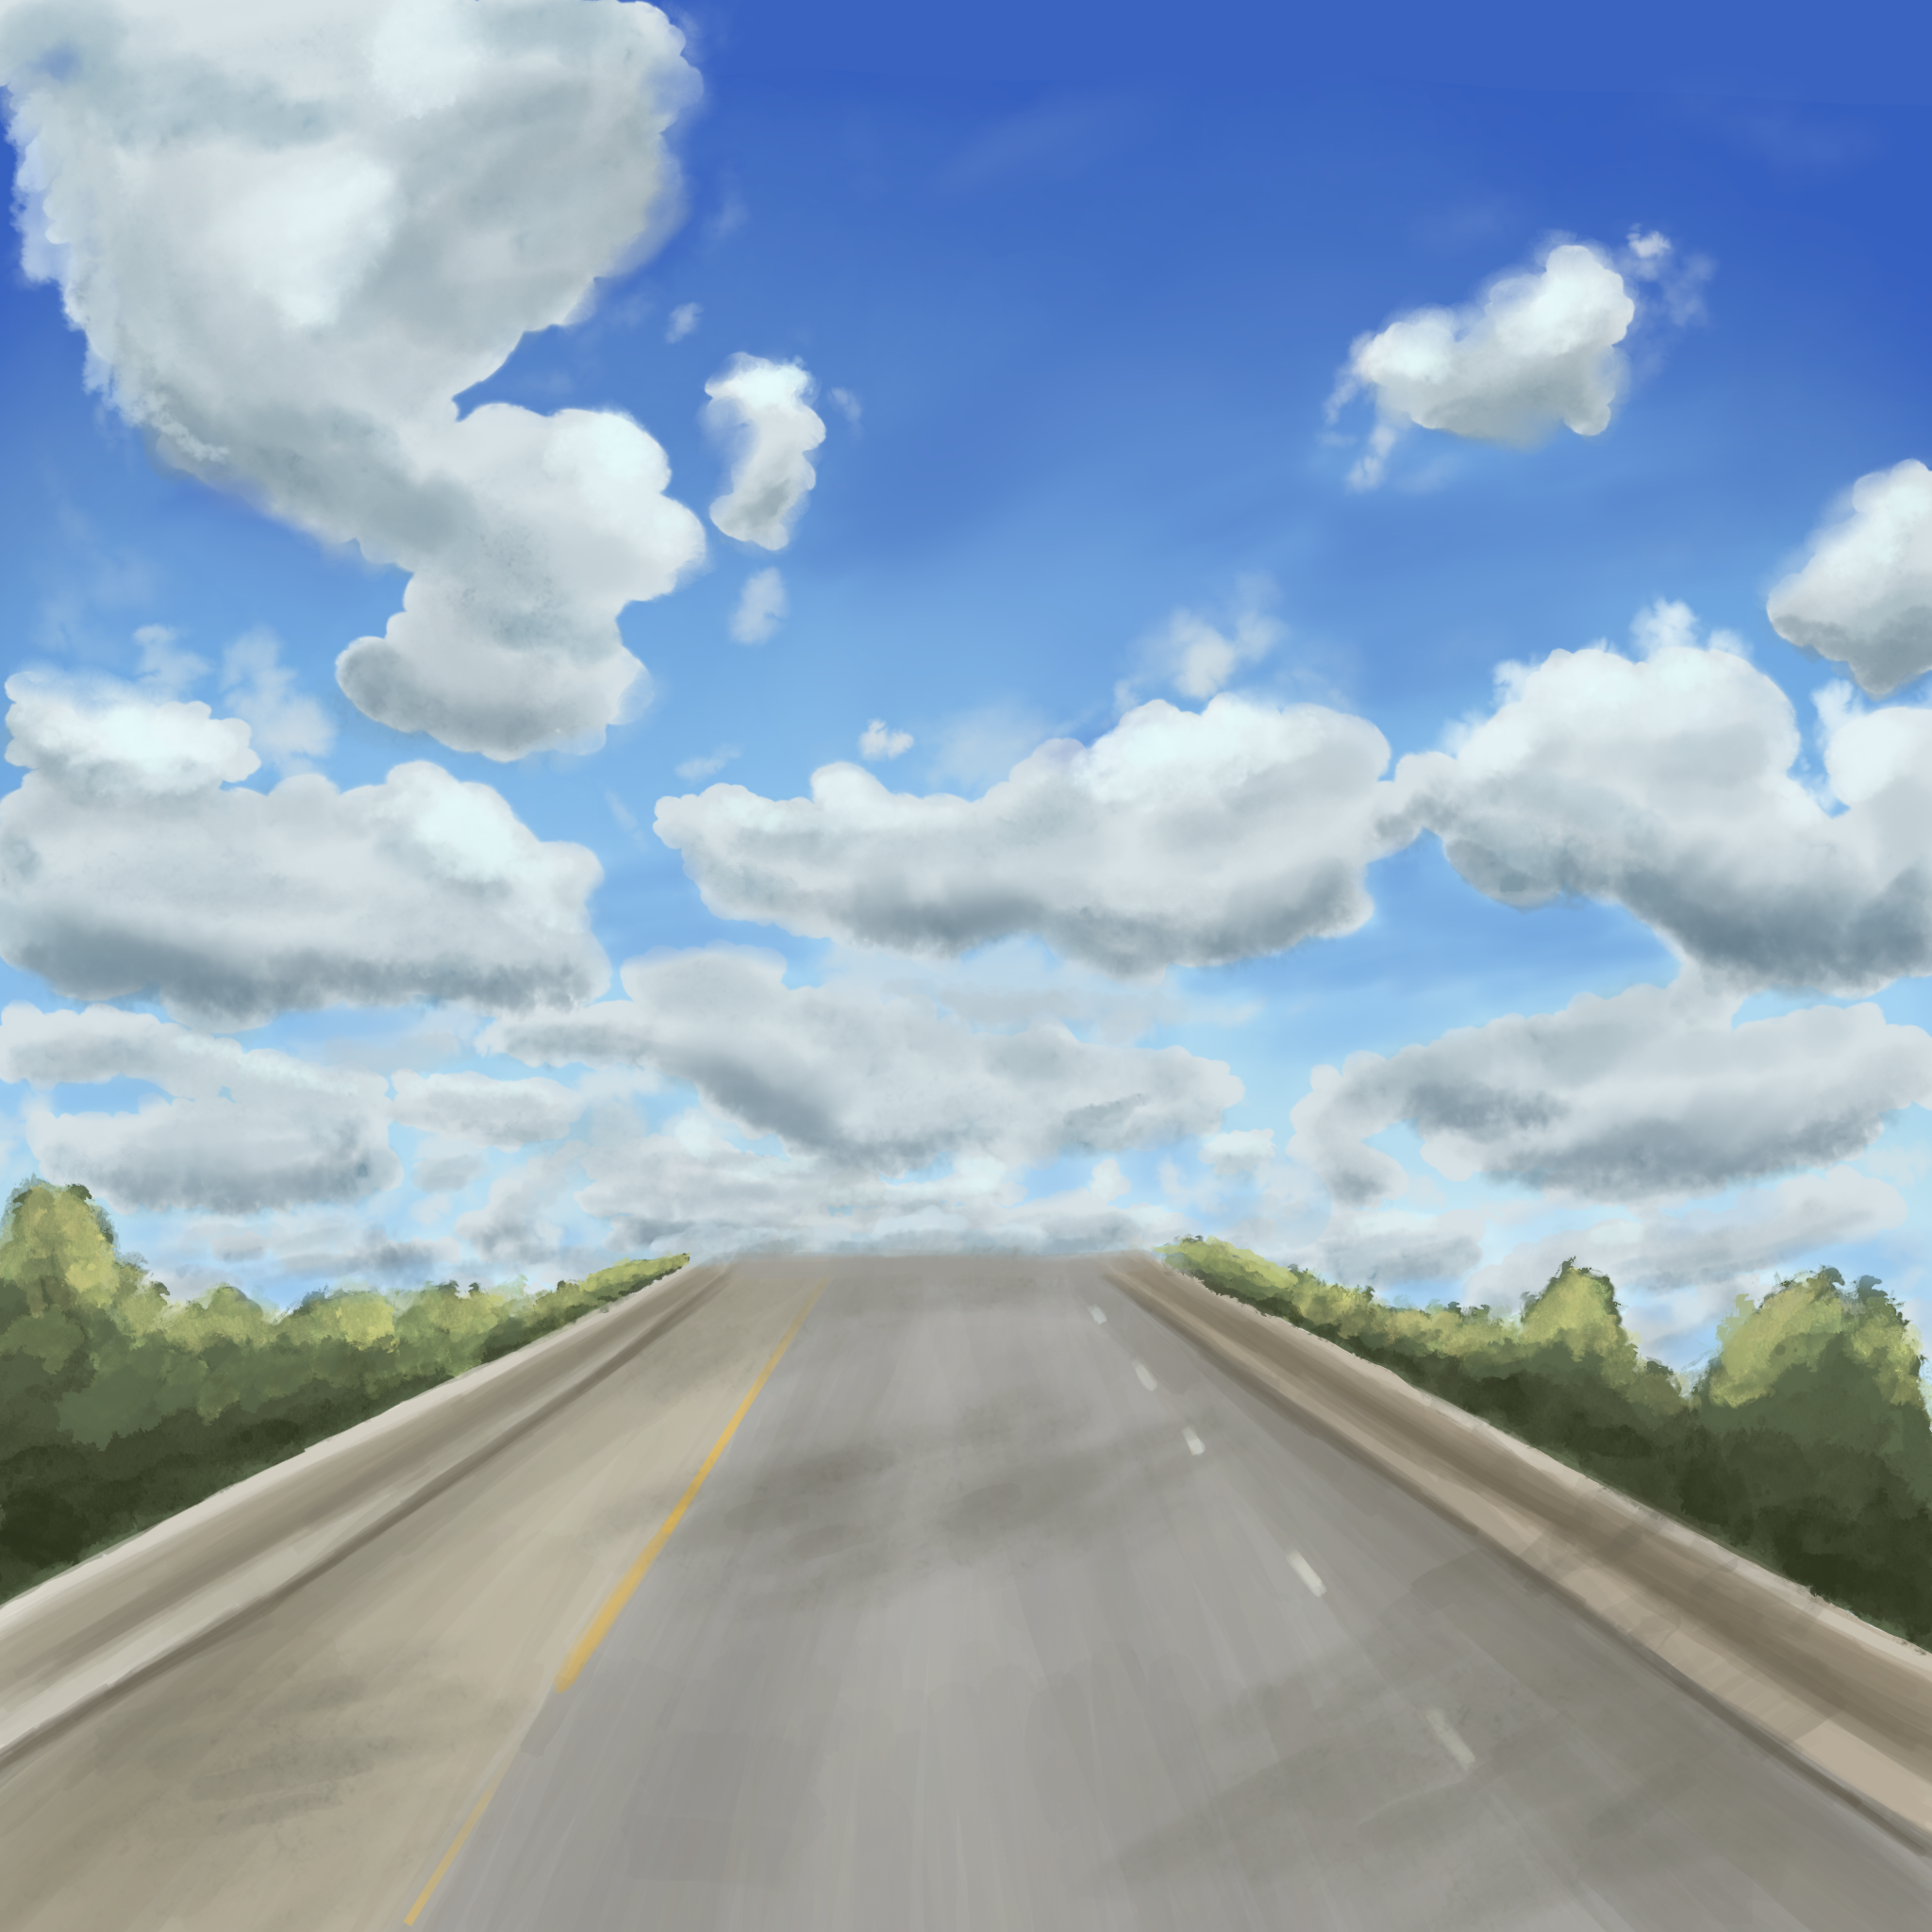 Artwork of a road and a cloudy sky